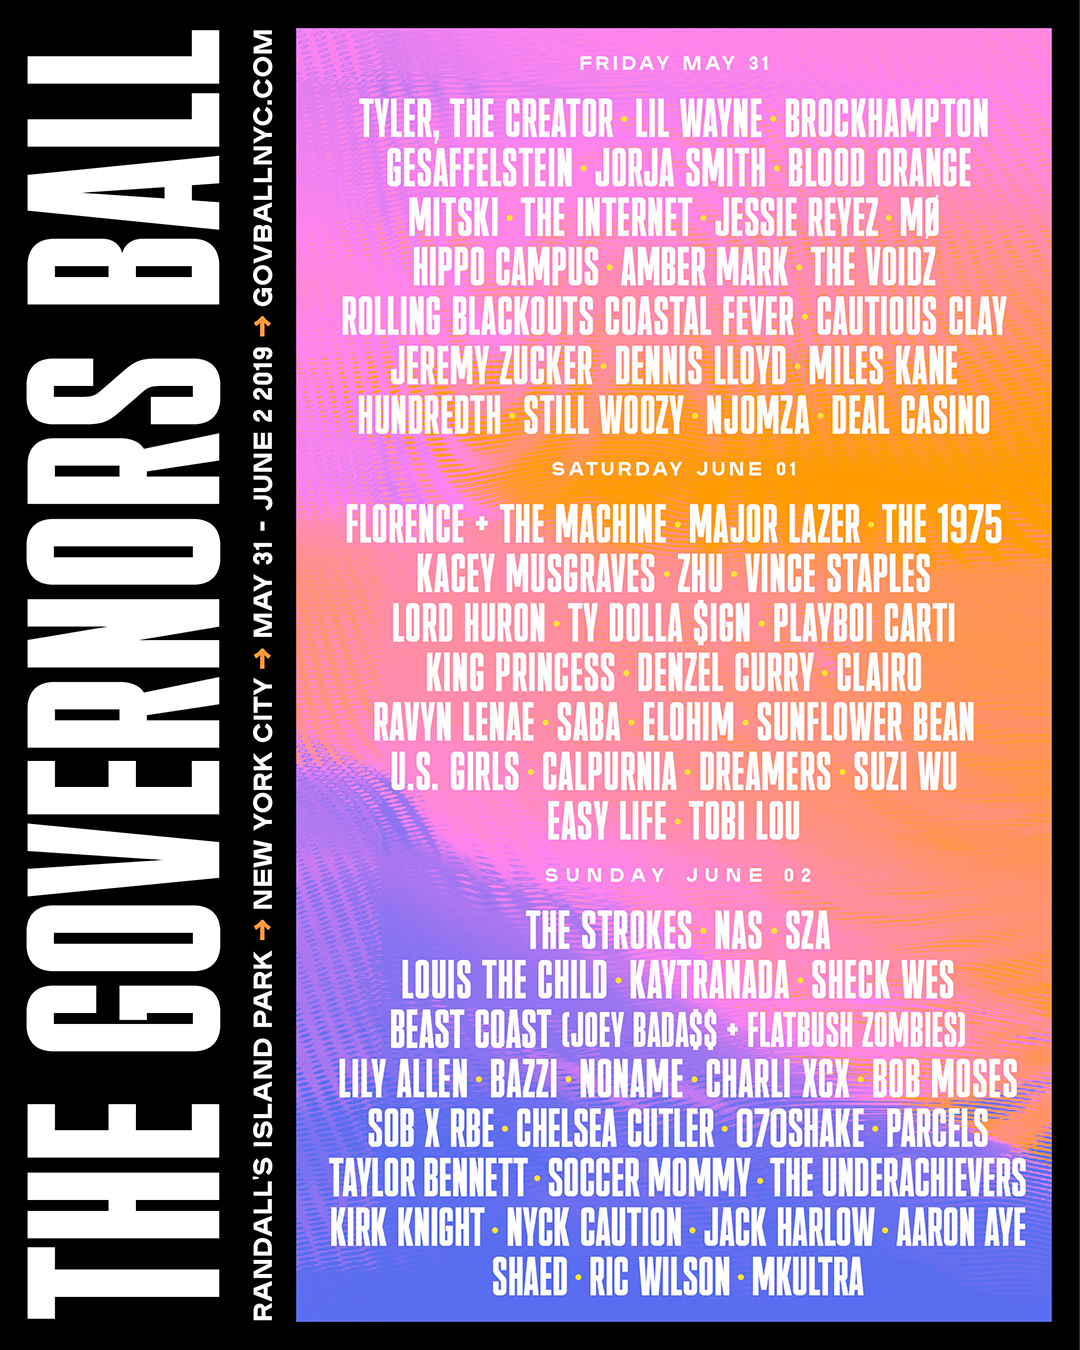 Governors Ball single day tickets on sale announcement